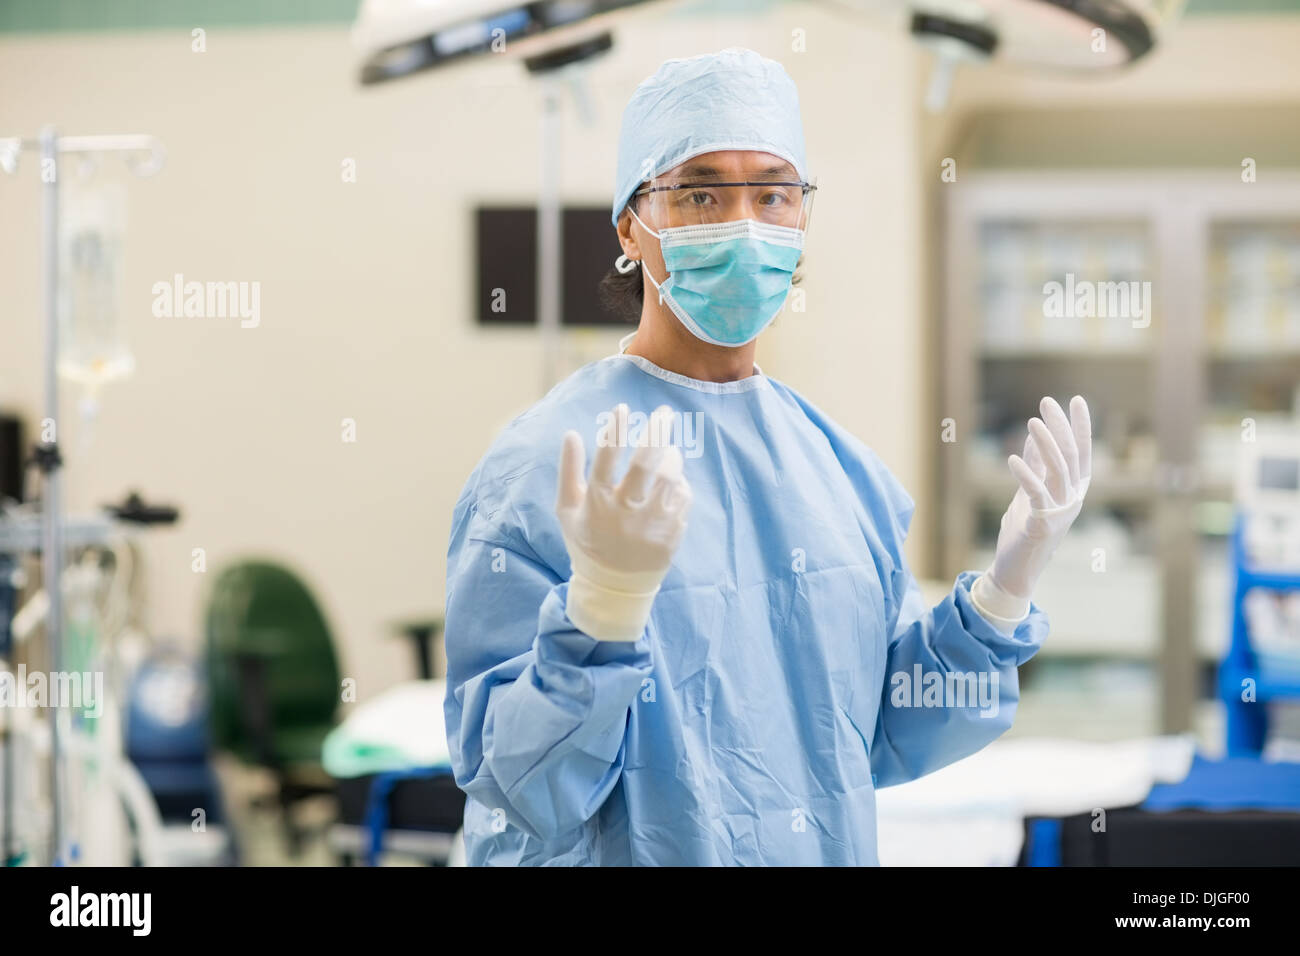 Surgeon In Surgical Gown Stock Photo